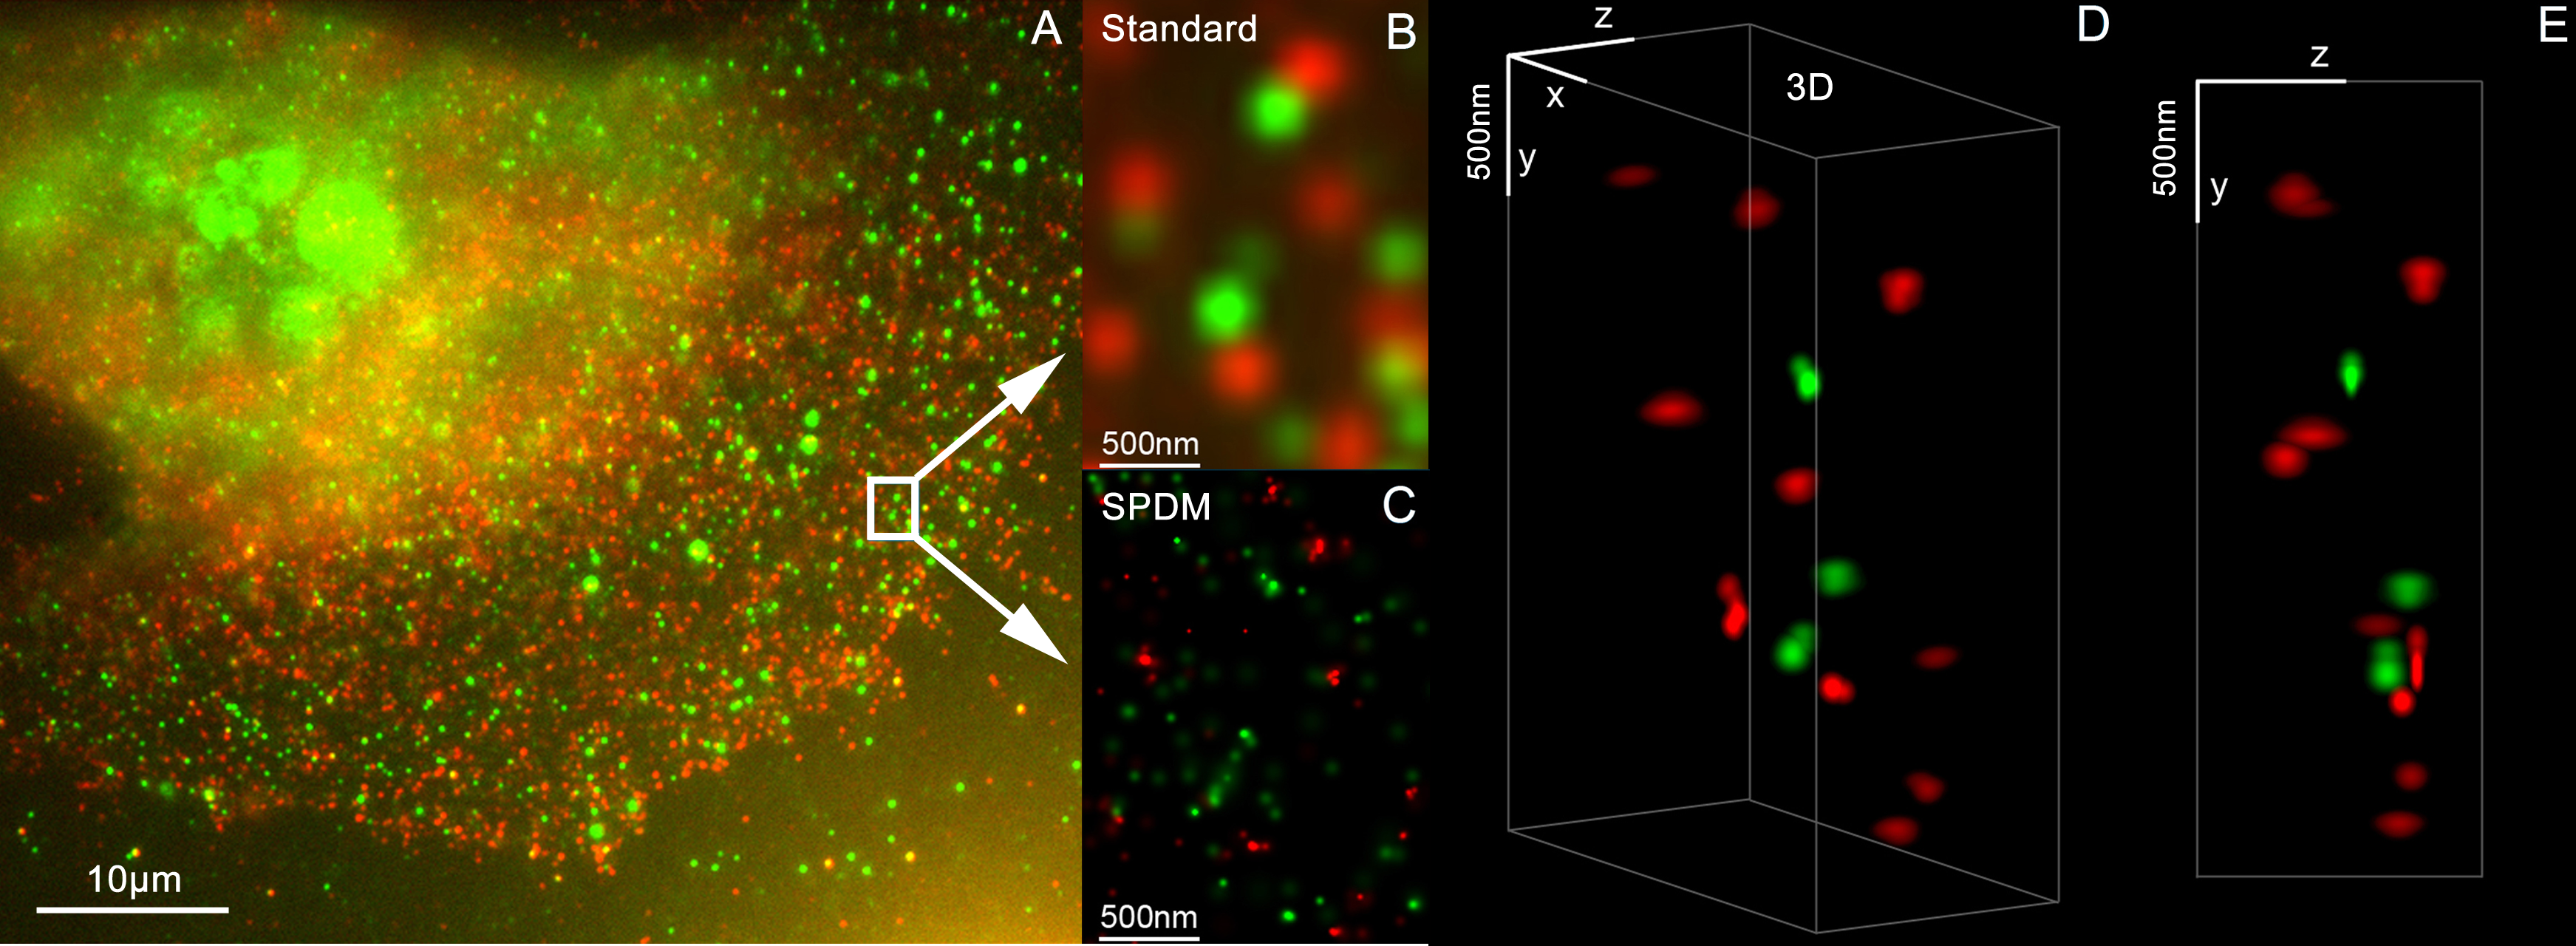 File:3D Dual Color Super Resolution Microscopy Cremer 2010 .png